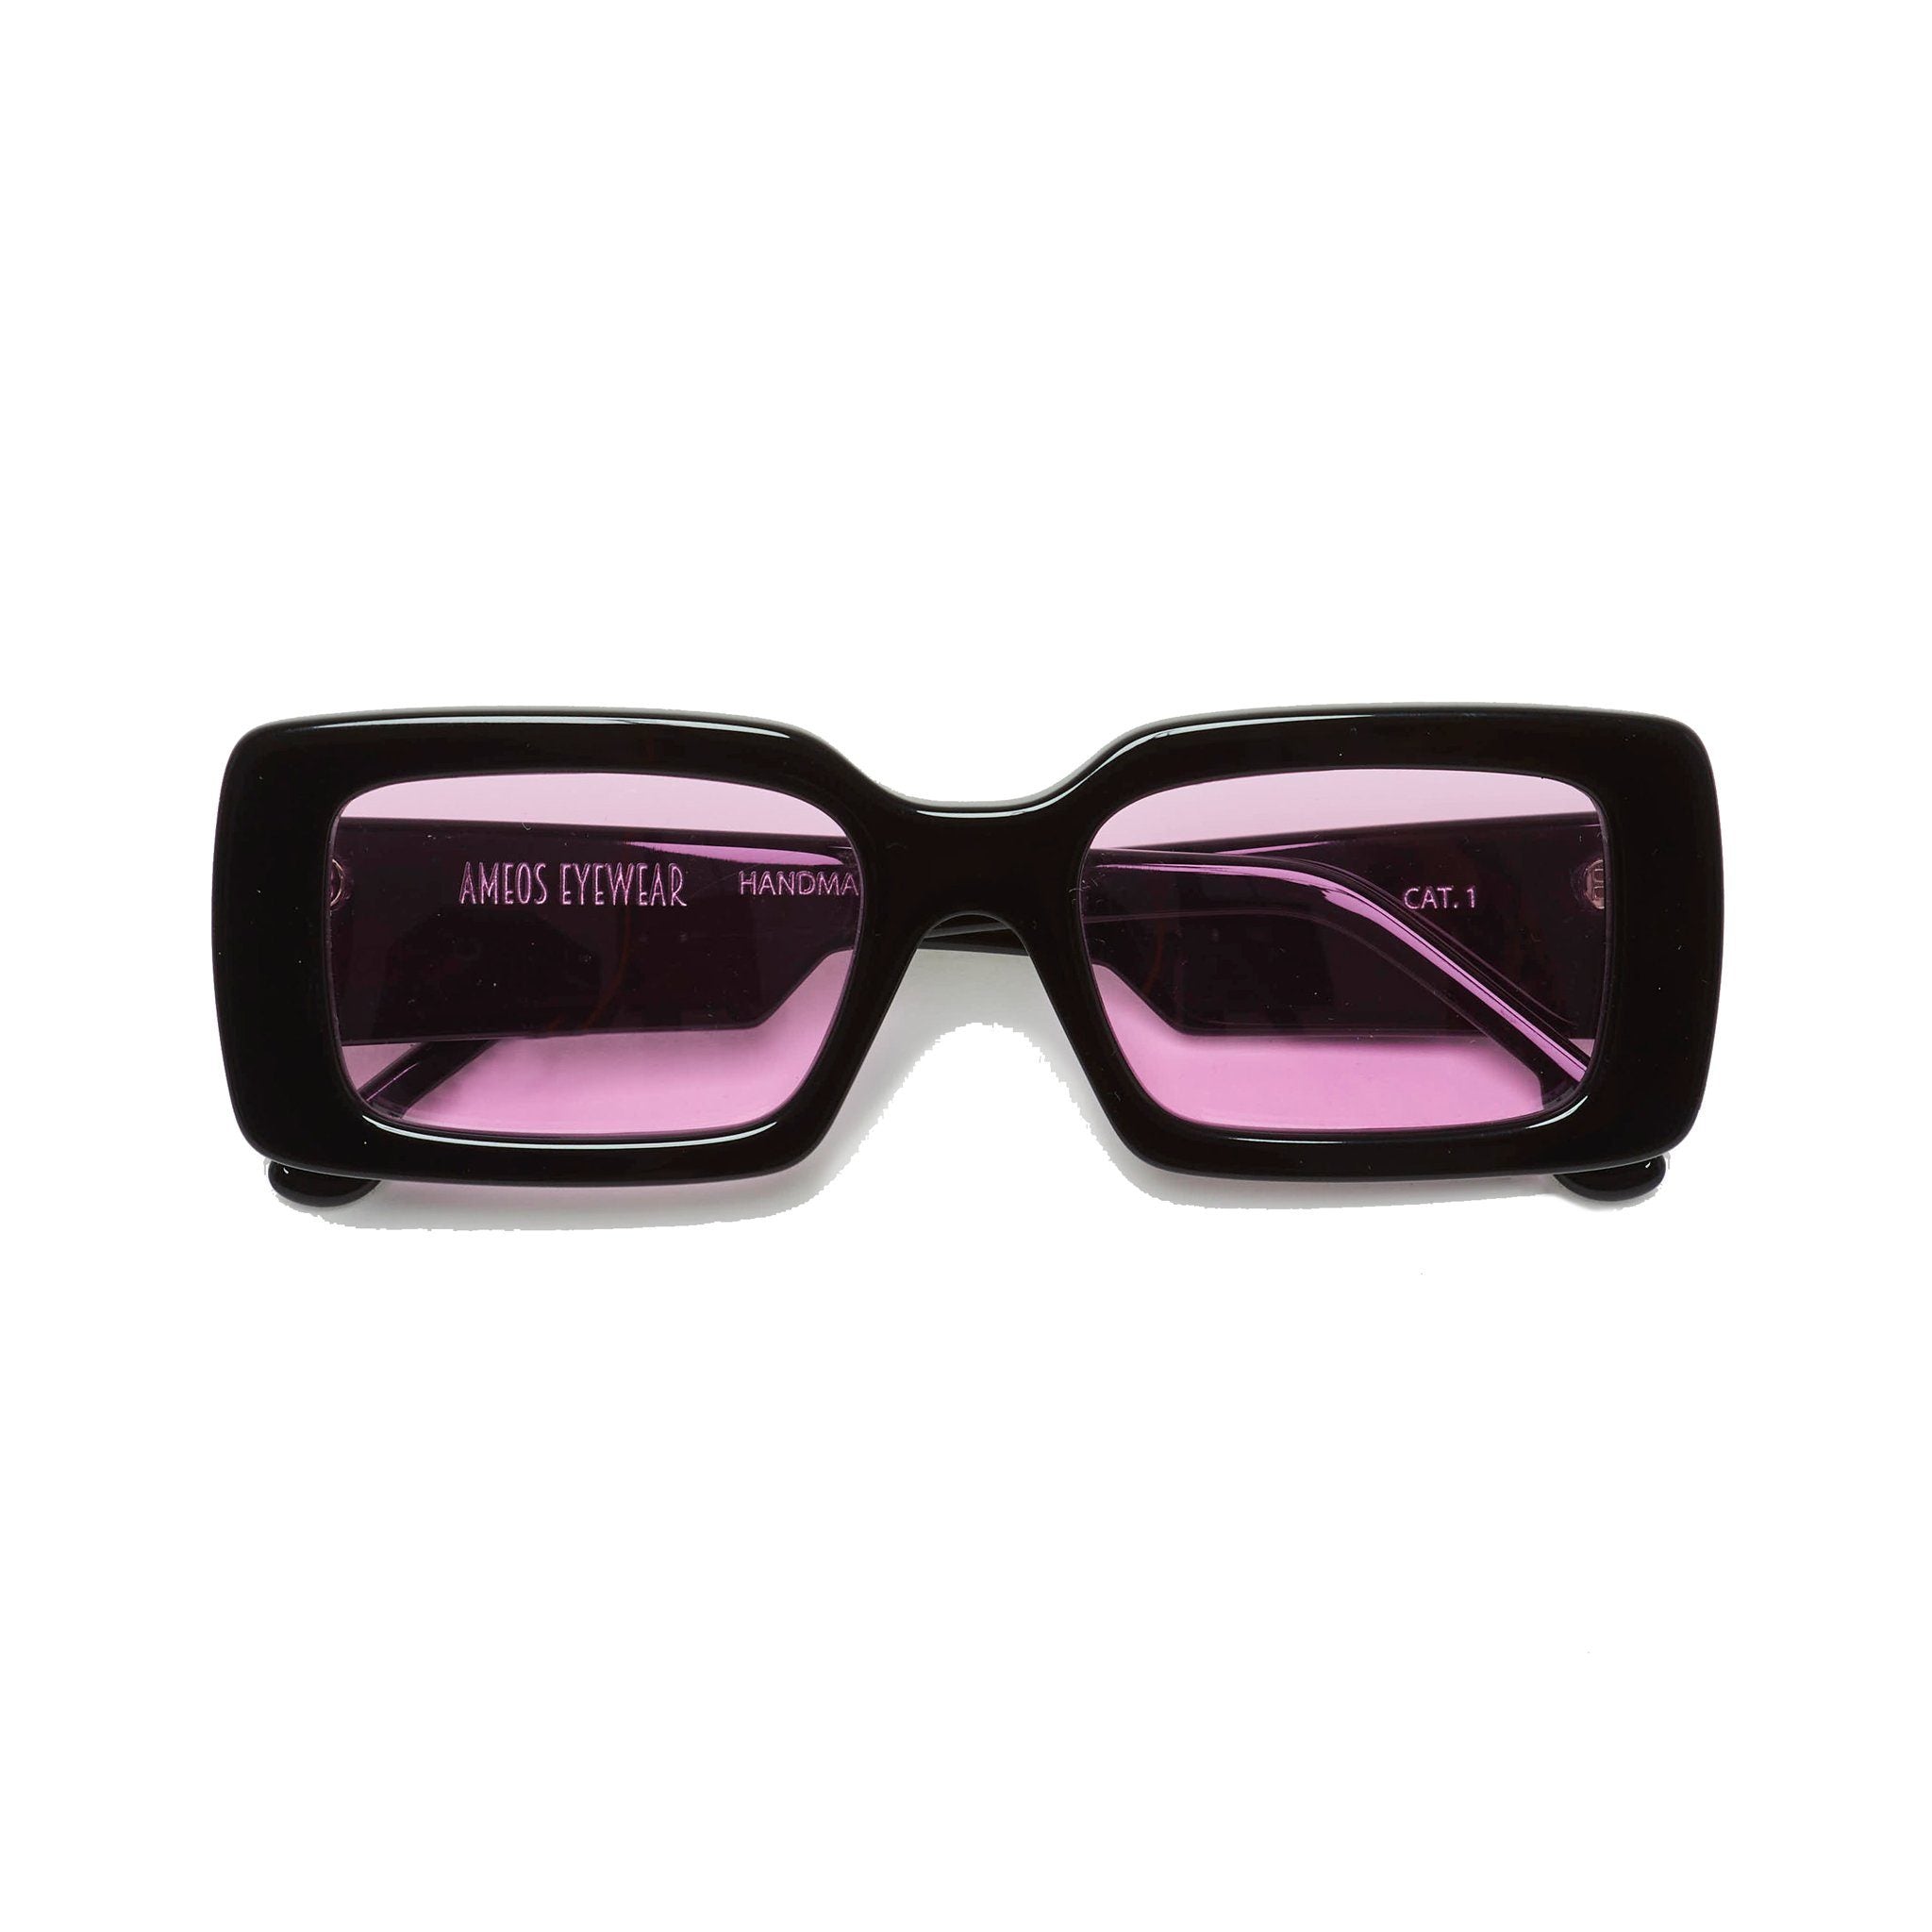 Black sunglasses frames with pink lenses handmade in italy. Front view temples crossed